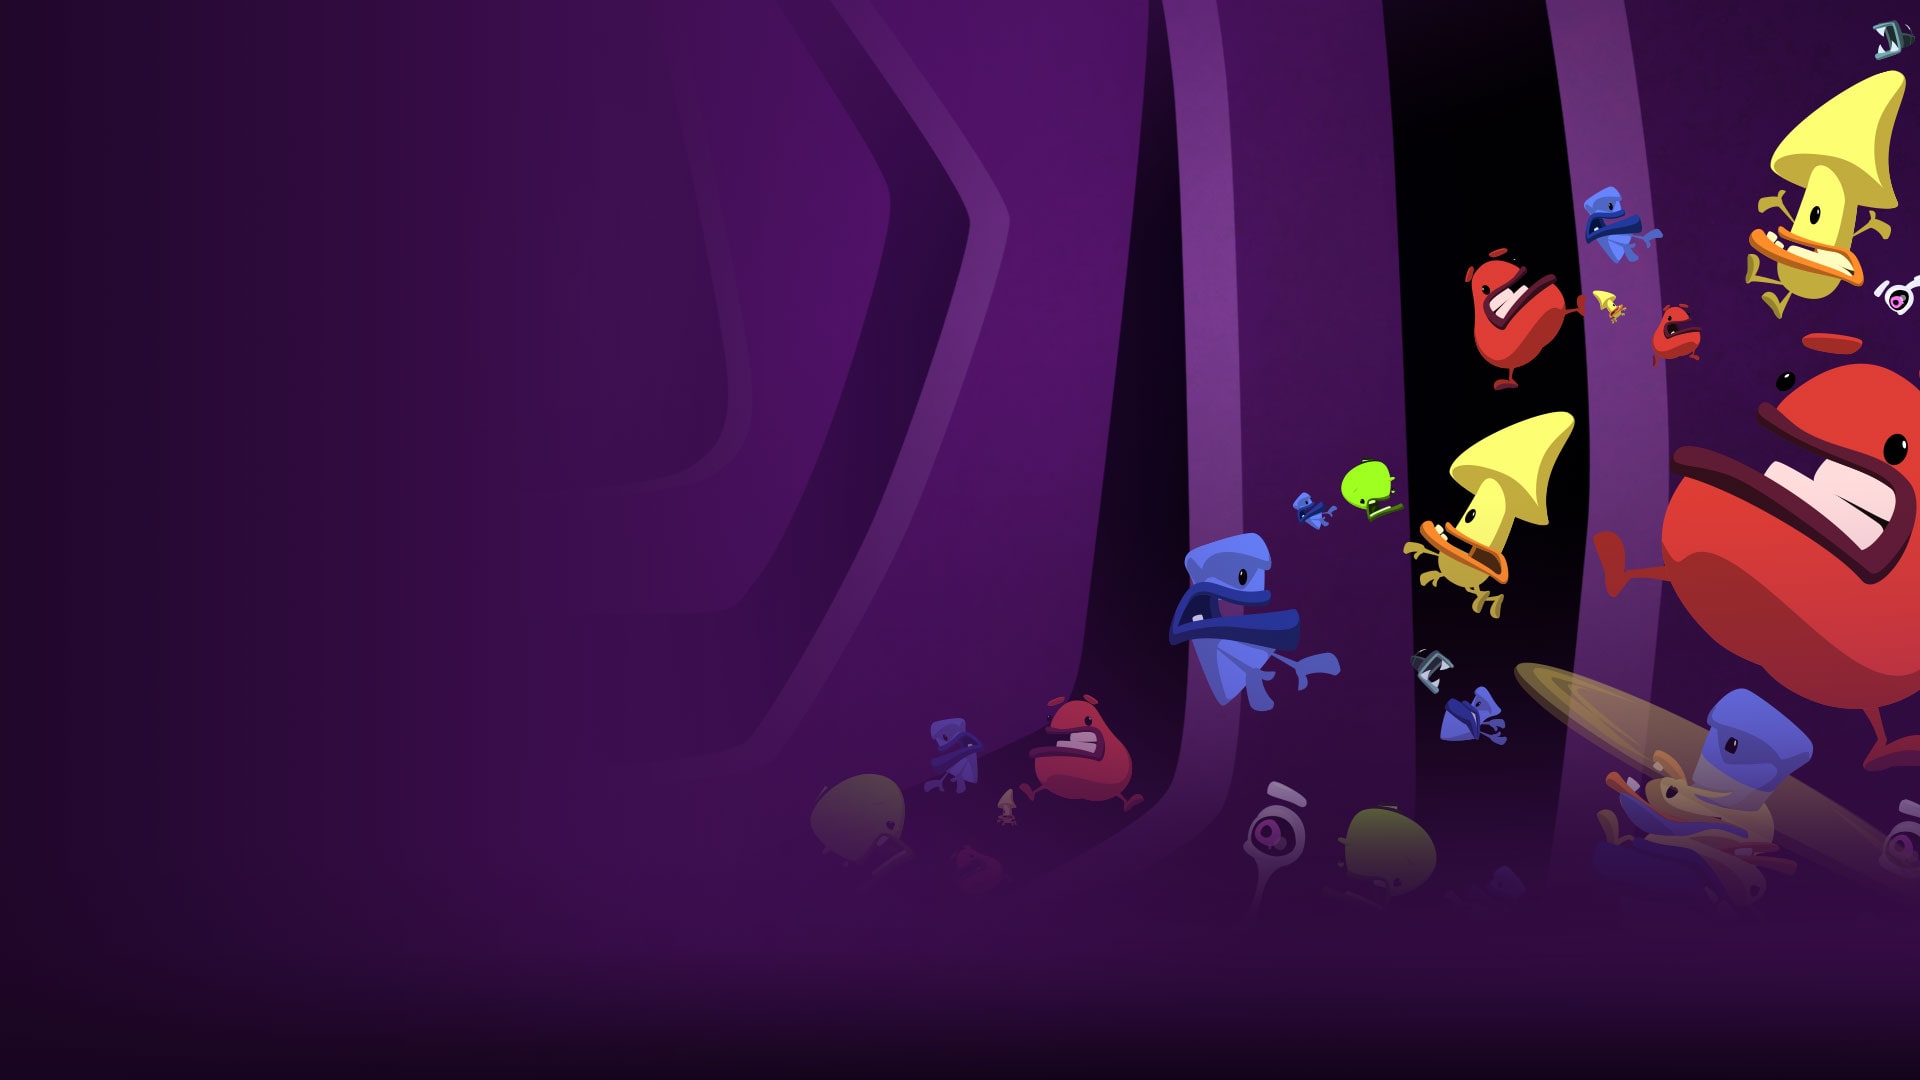 Schrödinger’s Cat and the Raiders of the Lost Quark